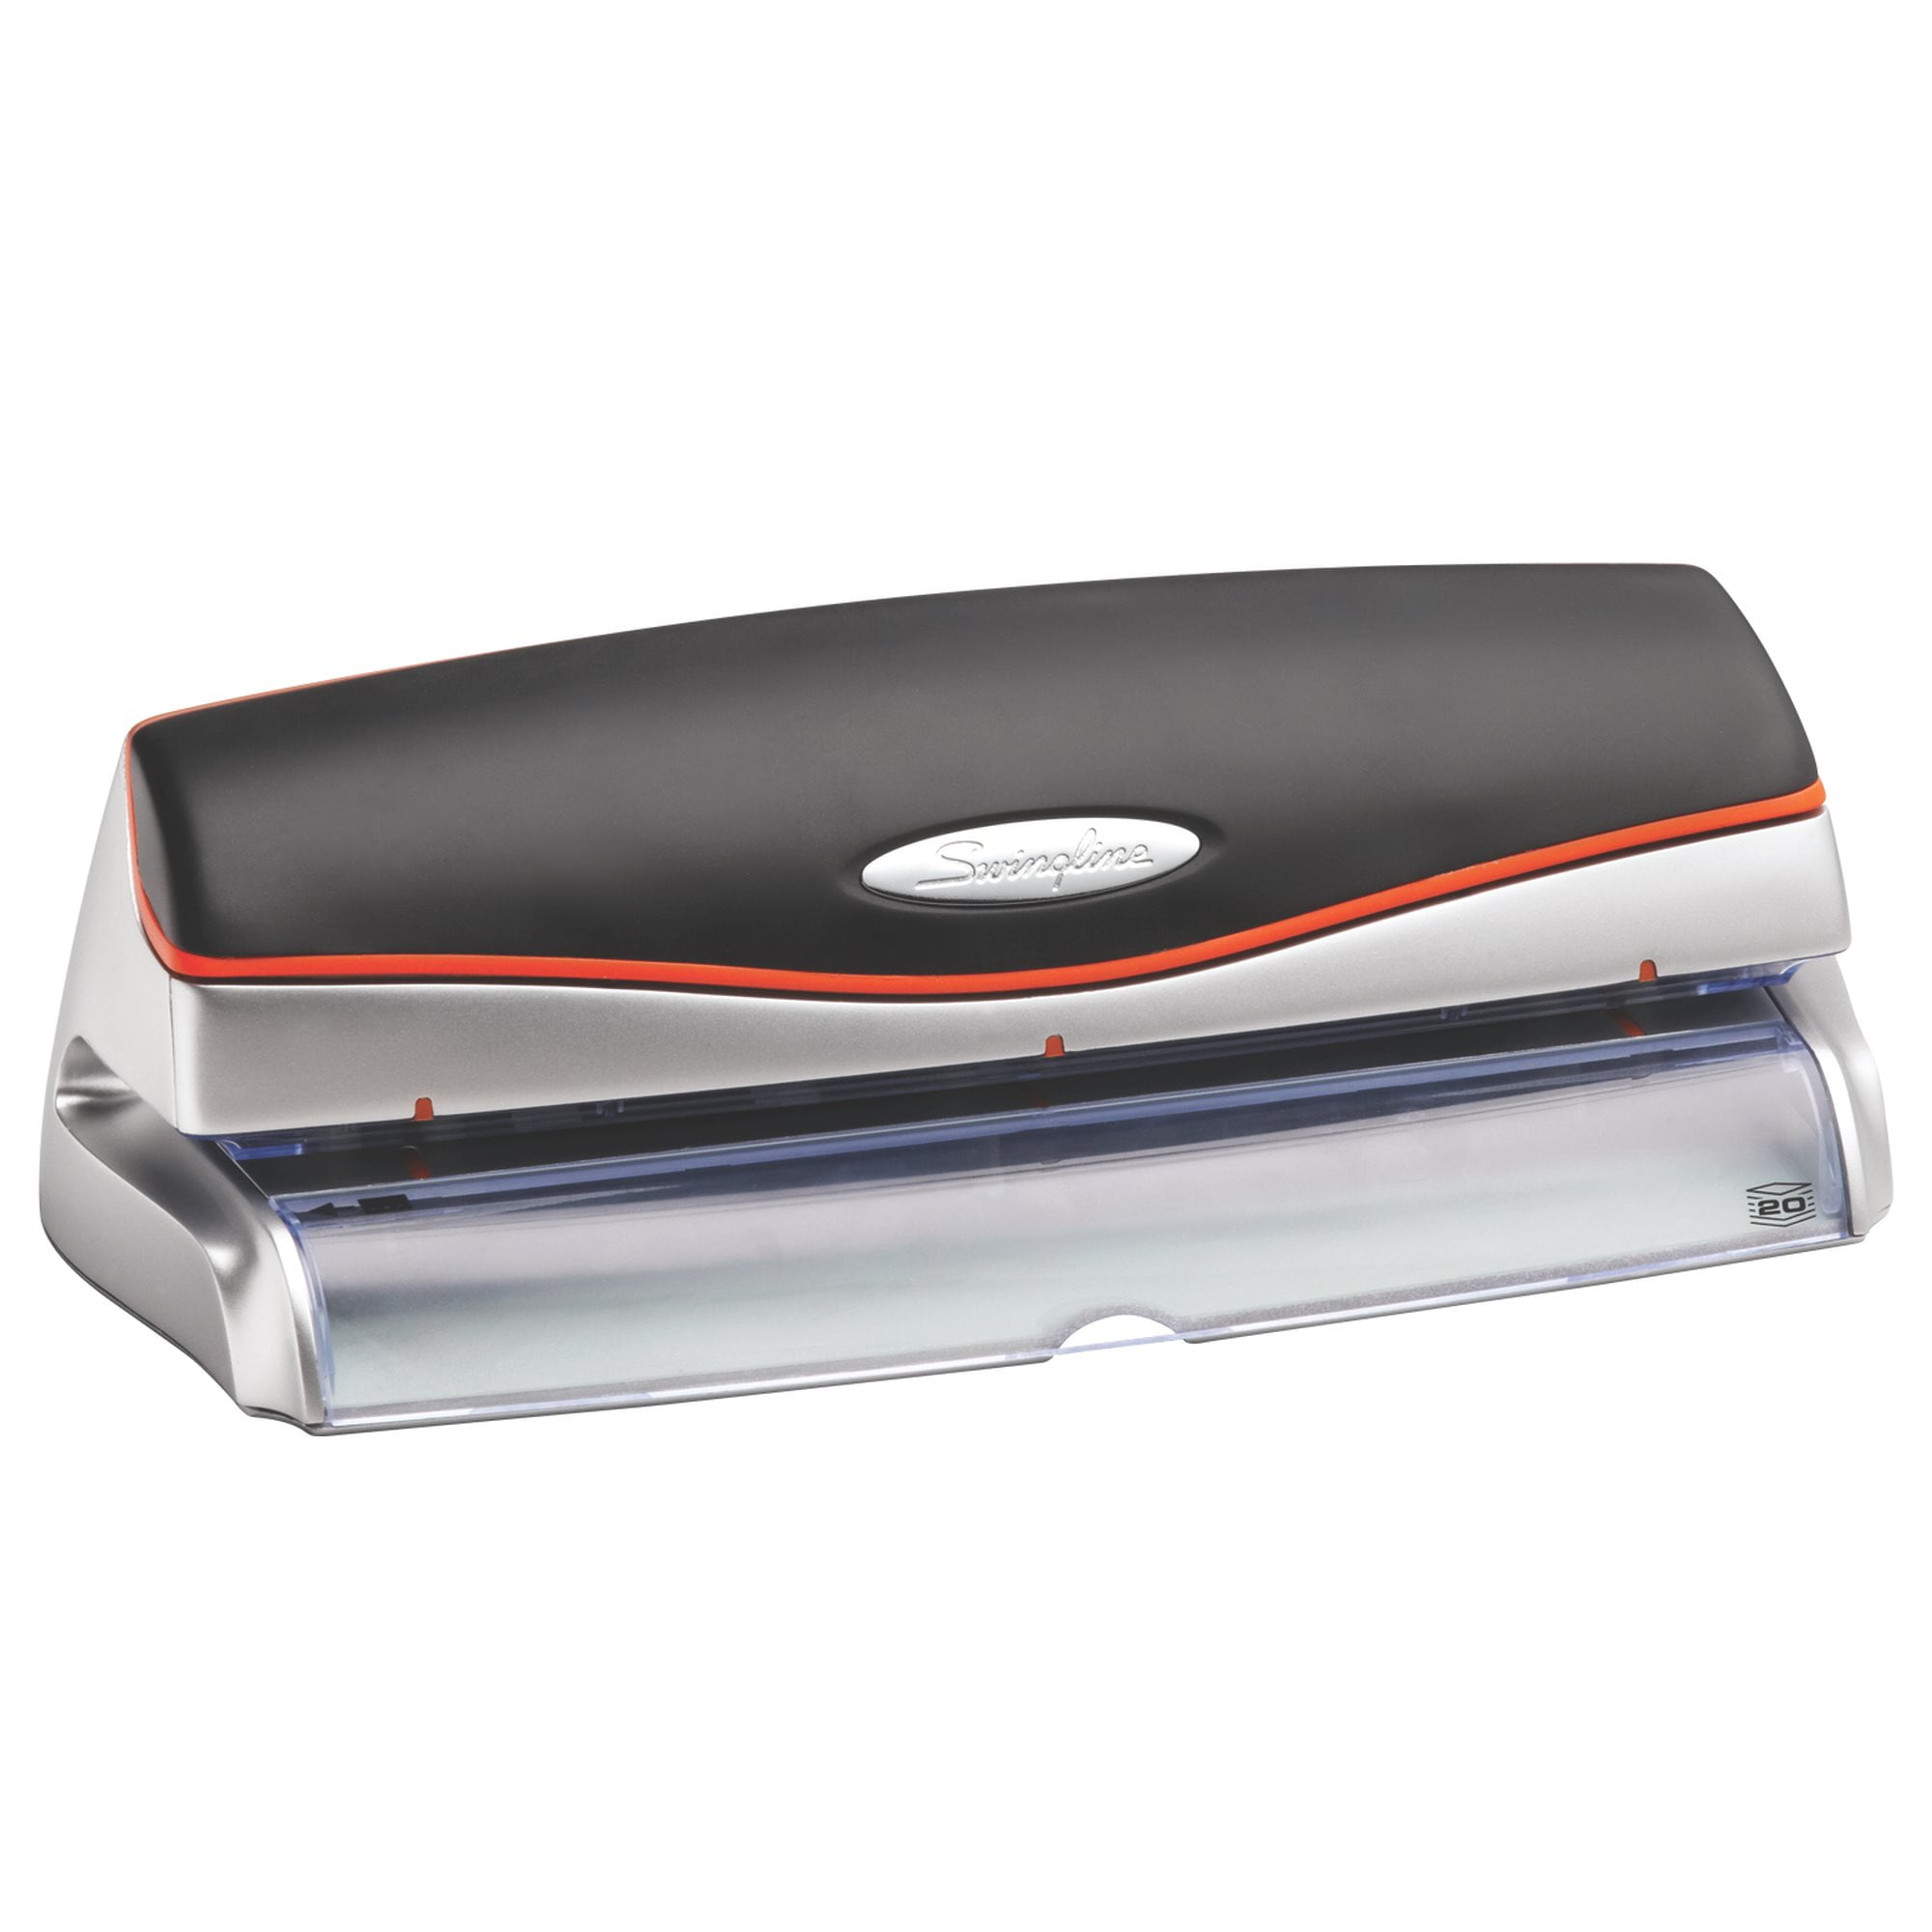 Swingline 74525 Commercial Electric 3 Hole Punch, 20 Sheet Capacity, 3 Hole